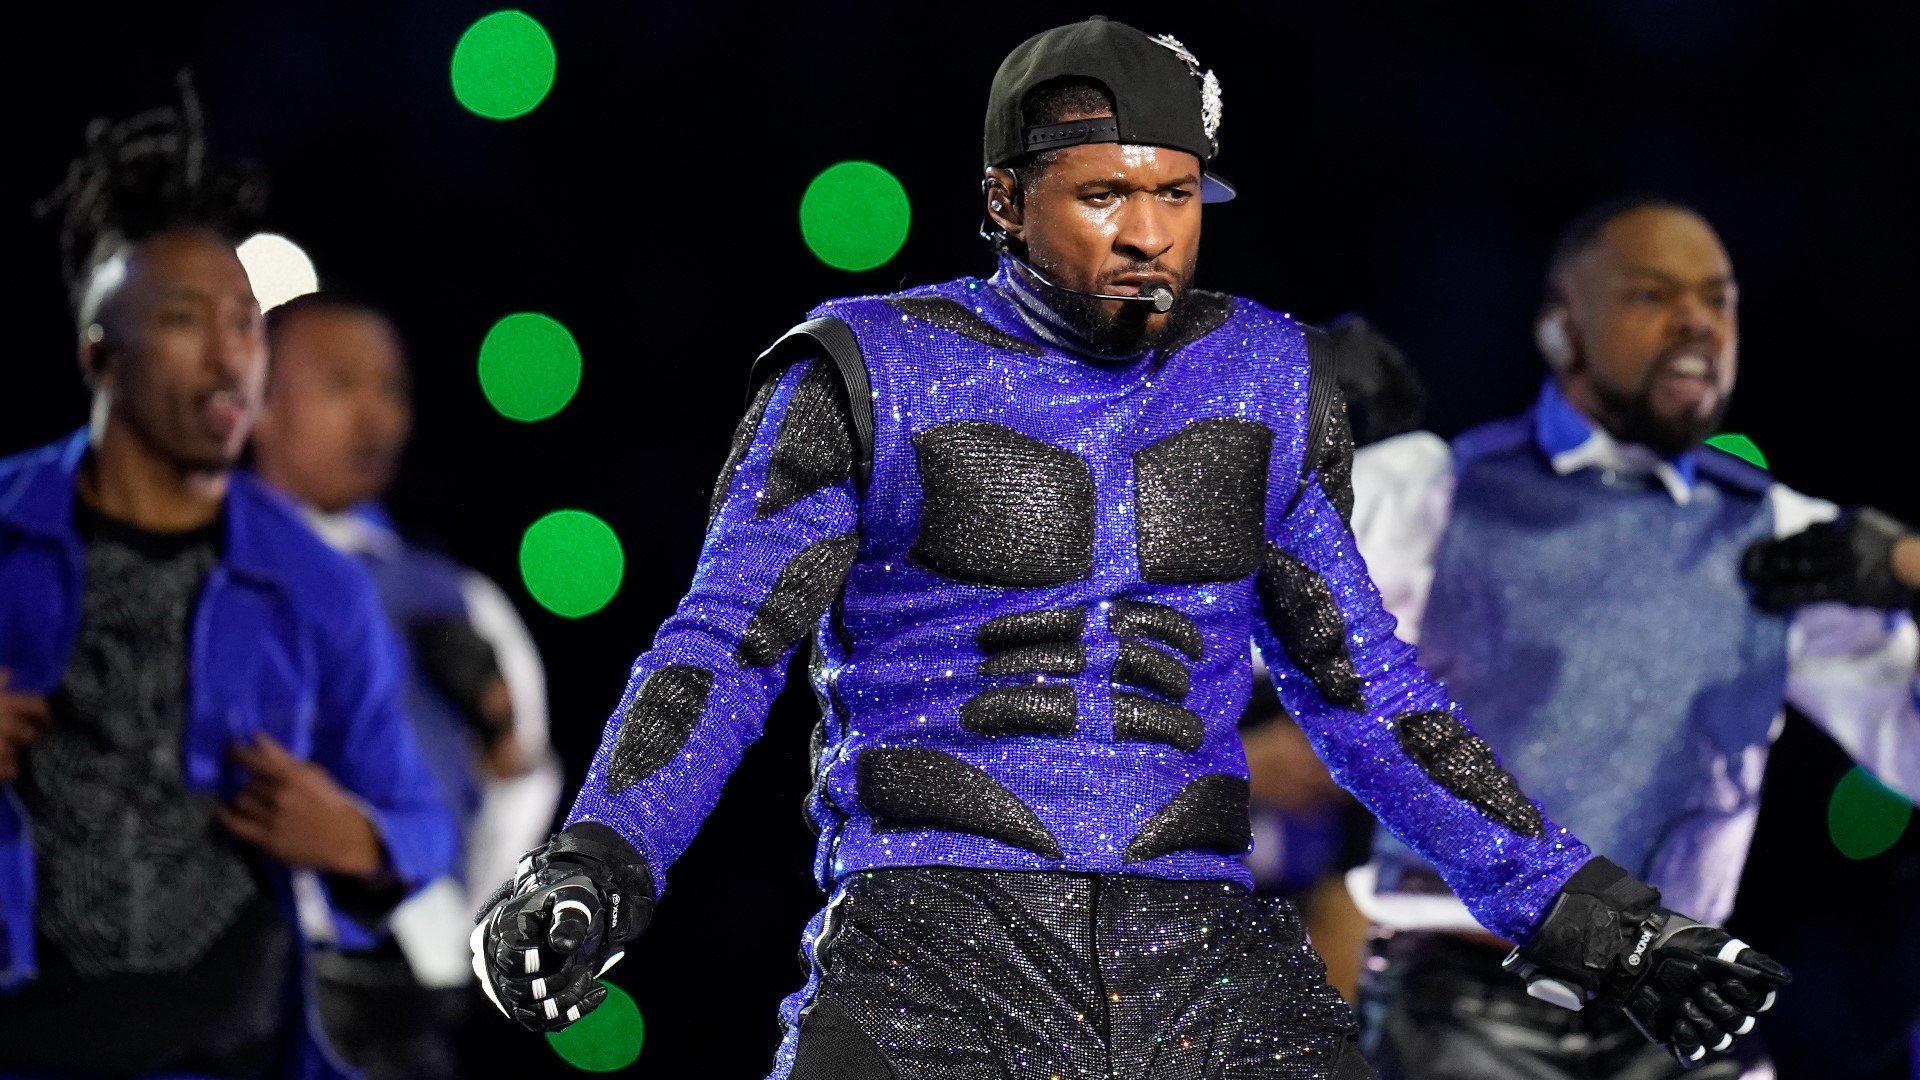 Usher "took the world to the A" after his Super Bowl performance took the whole world by storm.